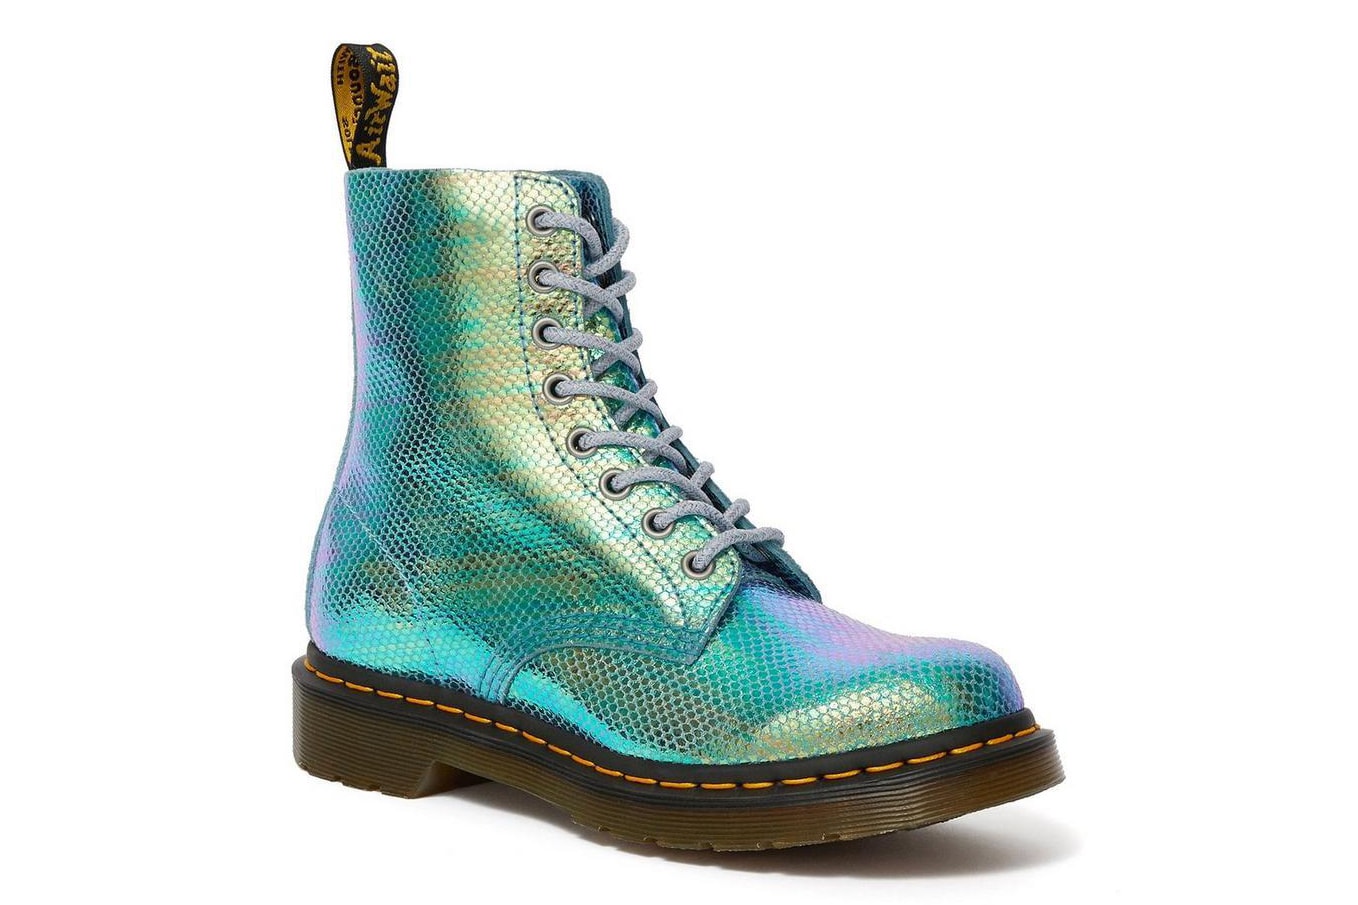 Dr. Martens Pink Blue Iridescent Platform Molly Pascal Boots Holly Shoes Holographic Metallic